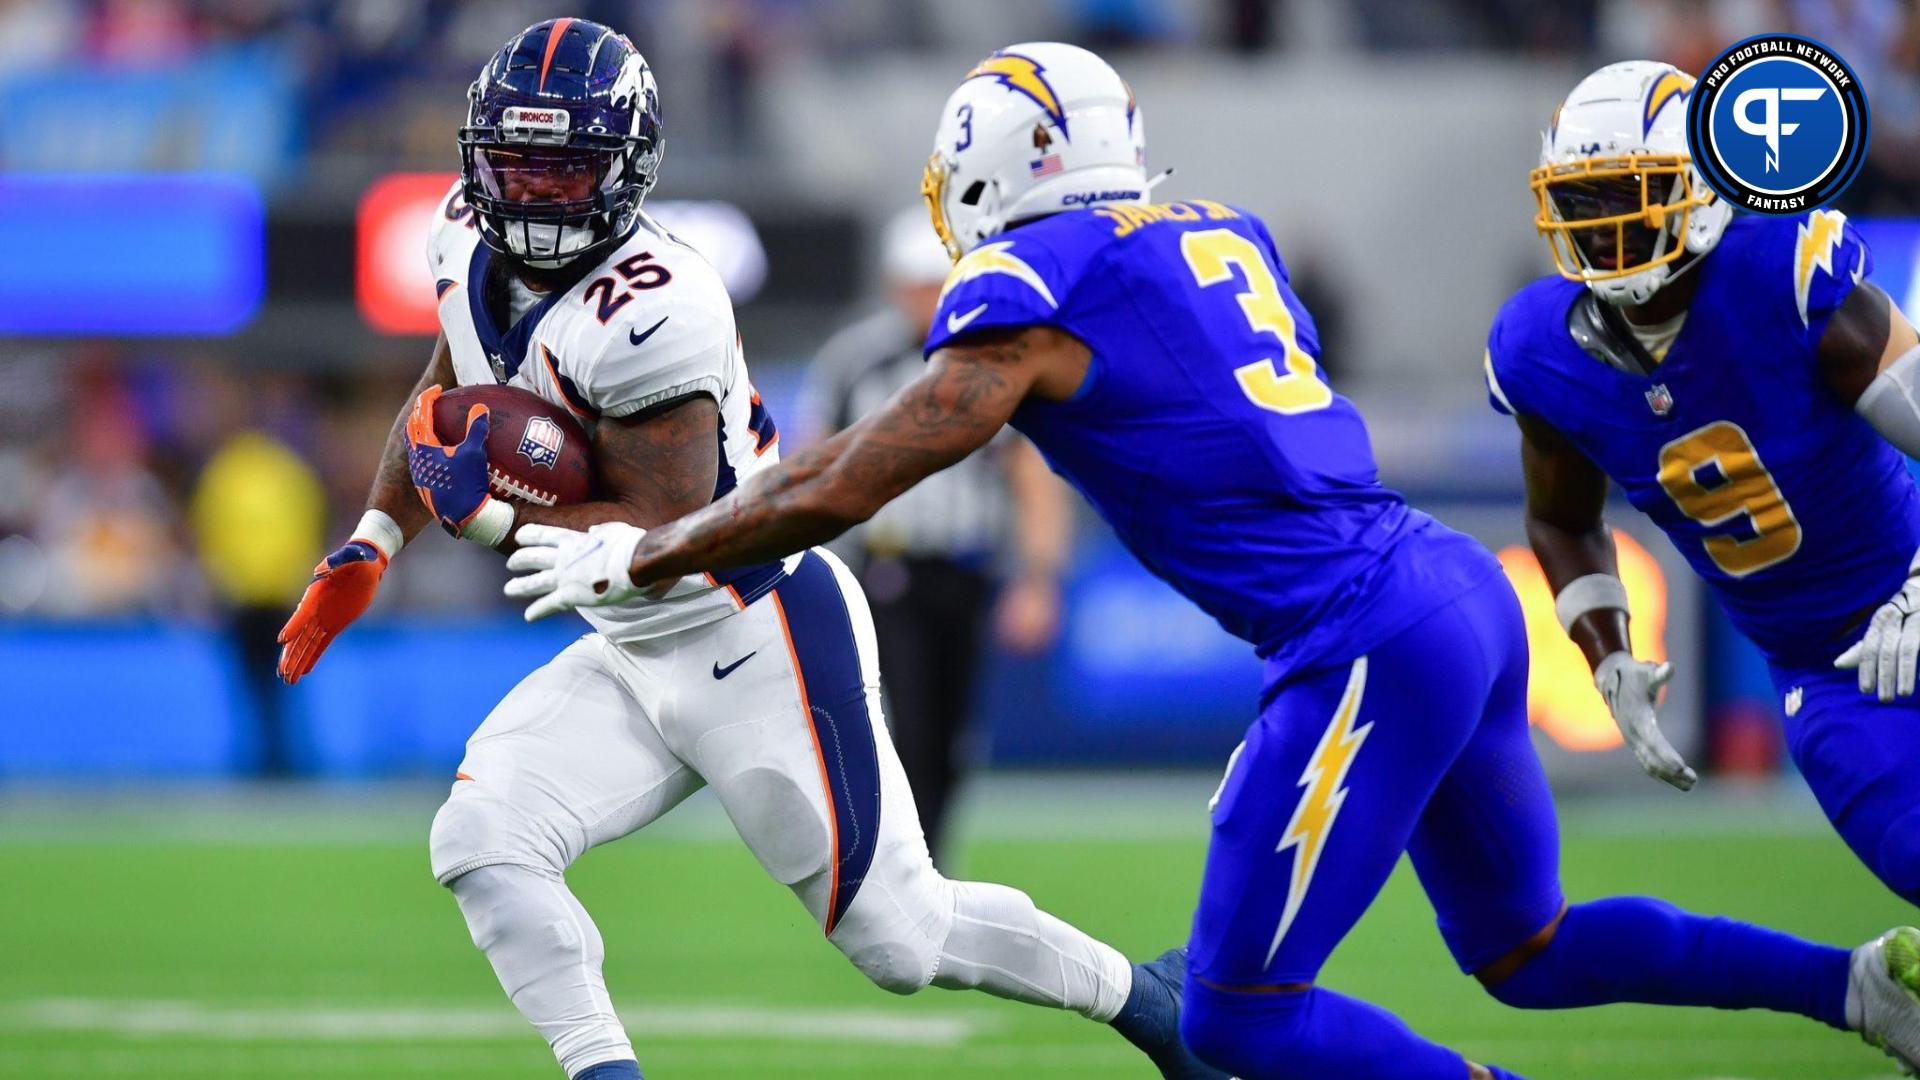 Denver Broncos running back Samaje Perine (25) runs the ball against Los Angeles Chargers safety Derwin James Jr. (3) during the second half at SoFi Stadium.